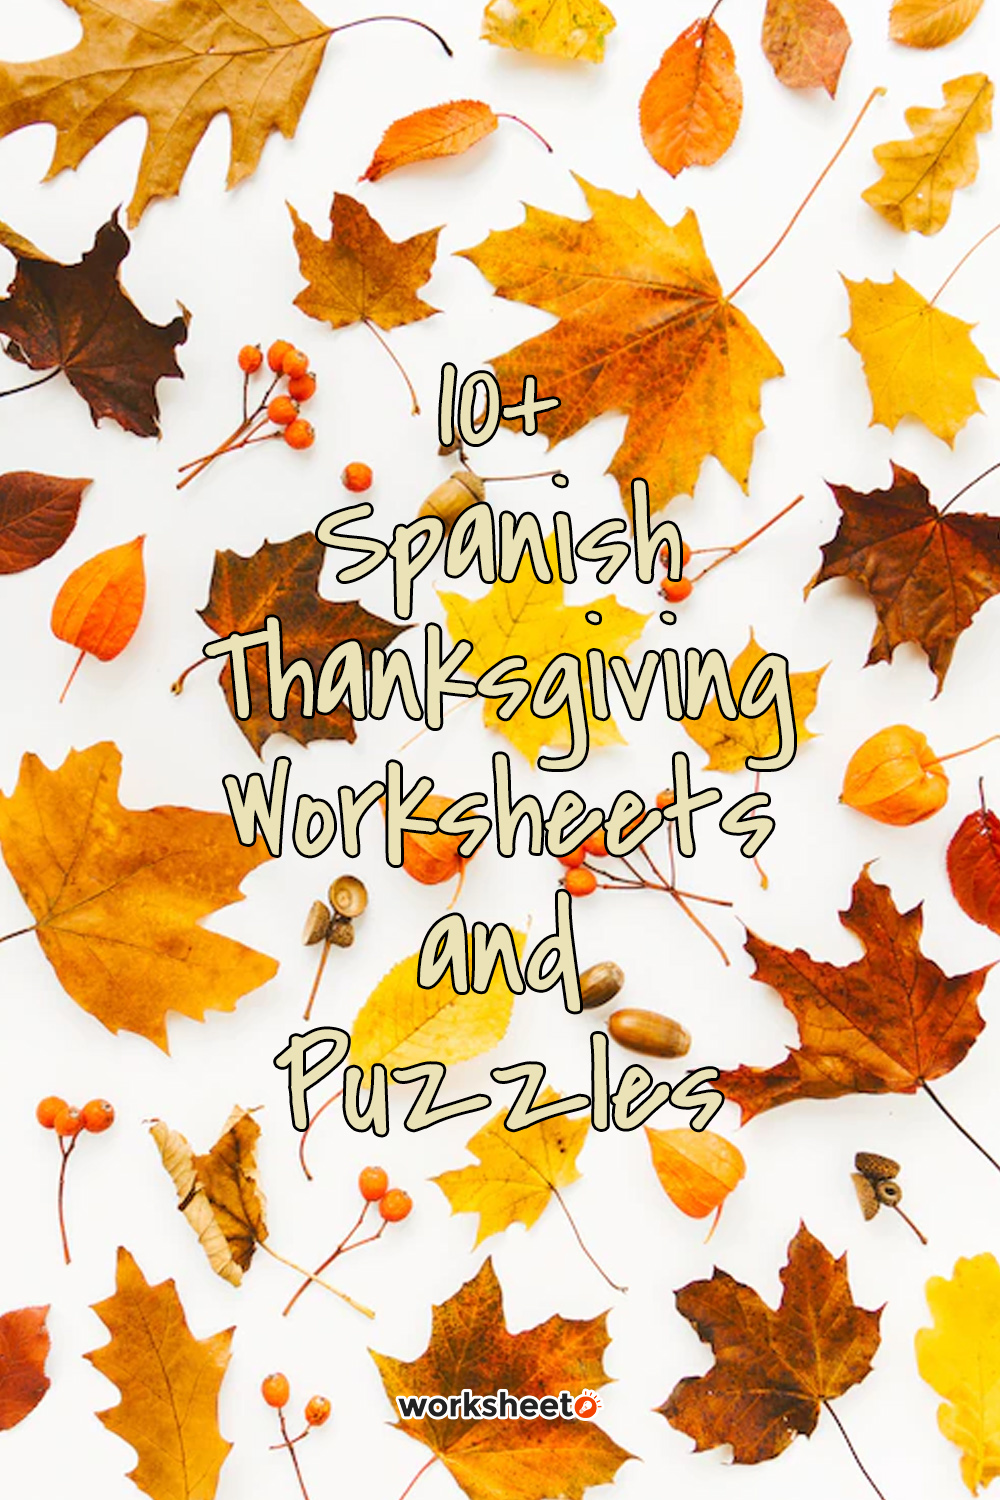 Spanish Thanksgiving Worksheets and Puzzles